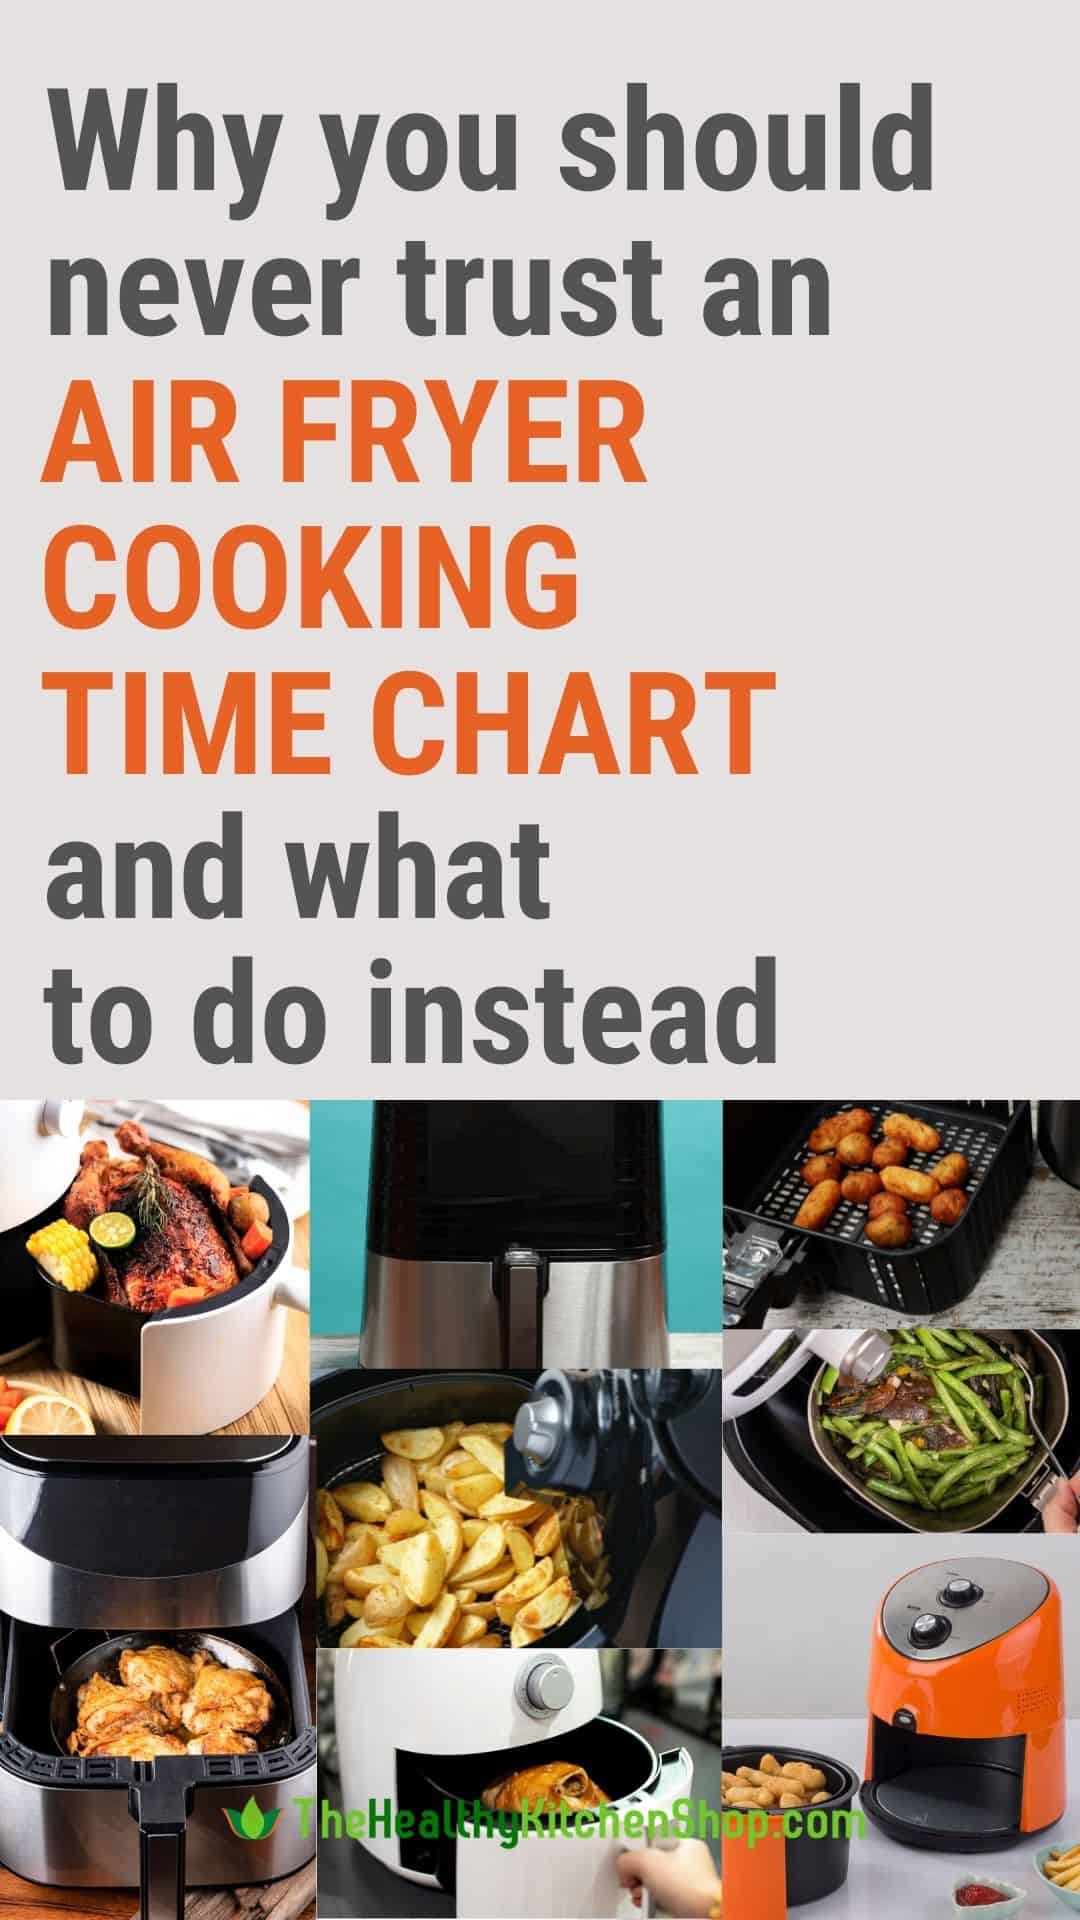 Why you should never trust an air fryer cooking chart and what to do instead.